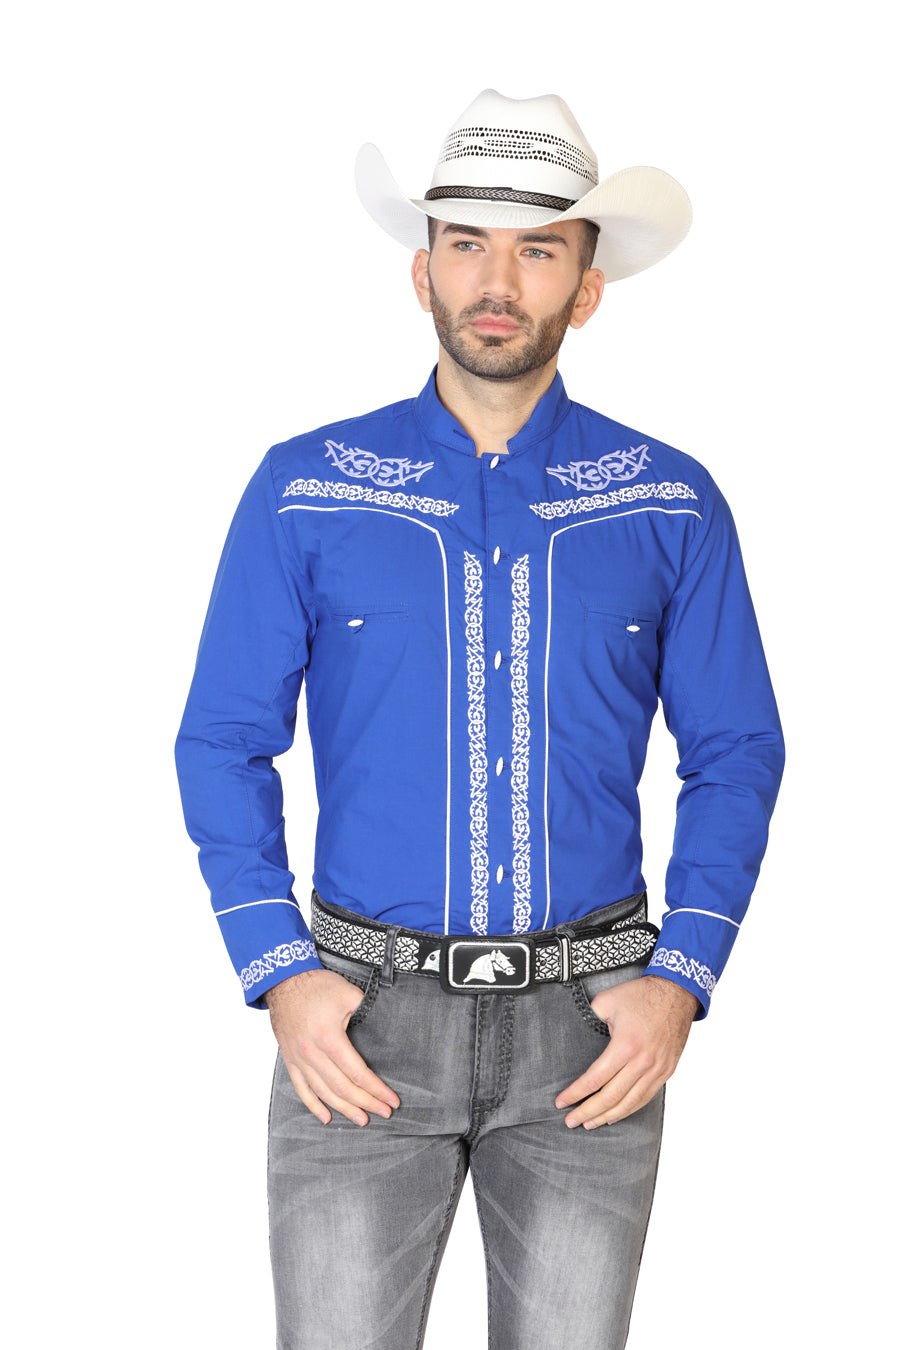 Charra Embroidered Long Sleeve Royal Blue Cowboy Shirt for Men 'The Lord of the Skies' - ID: 42878